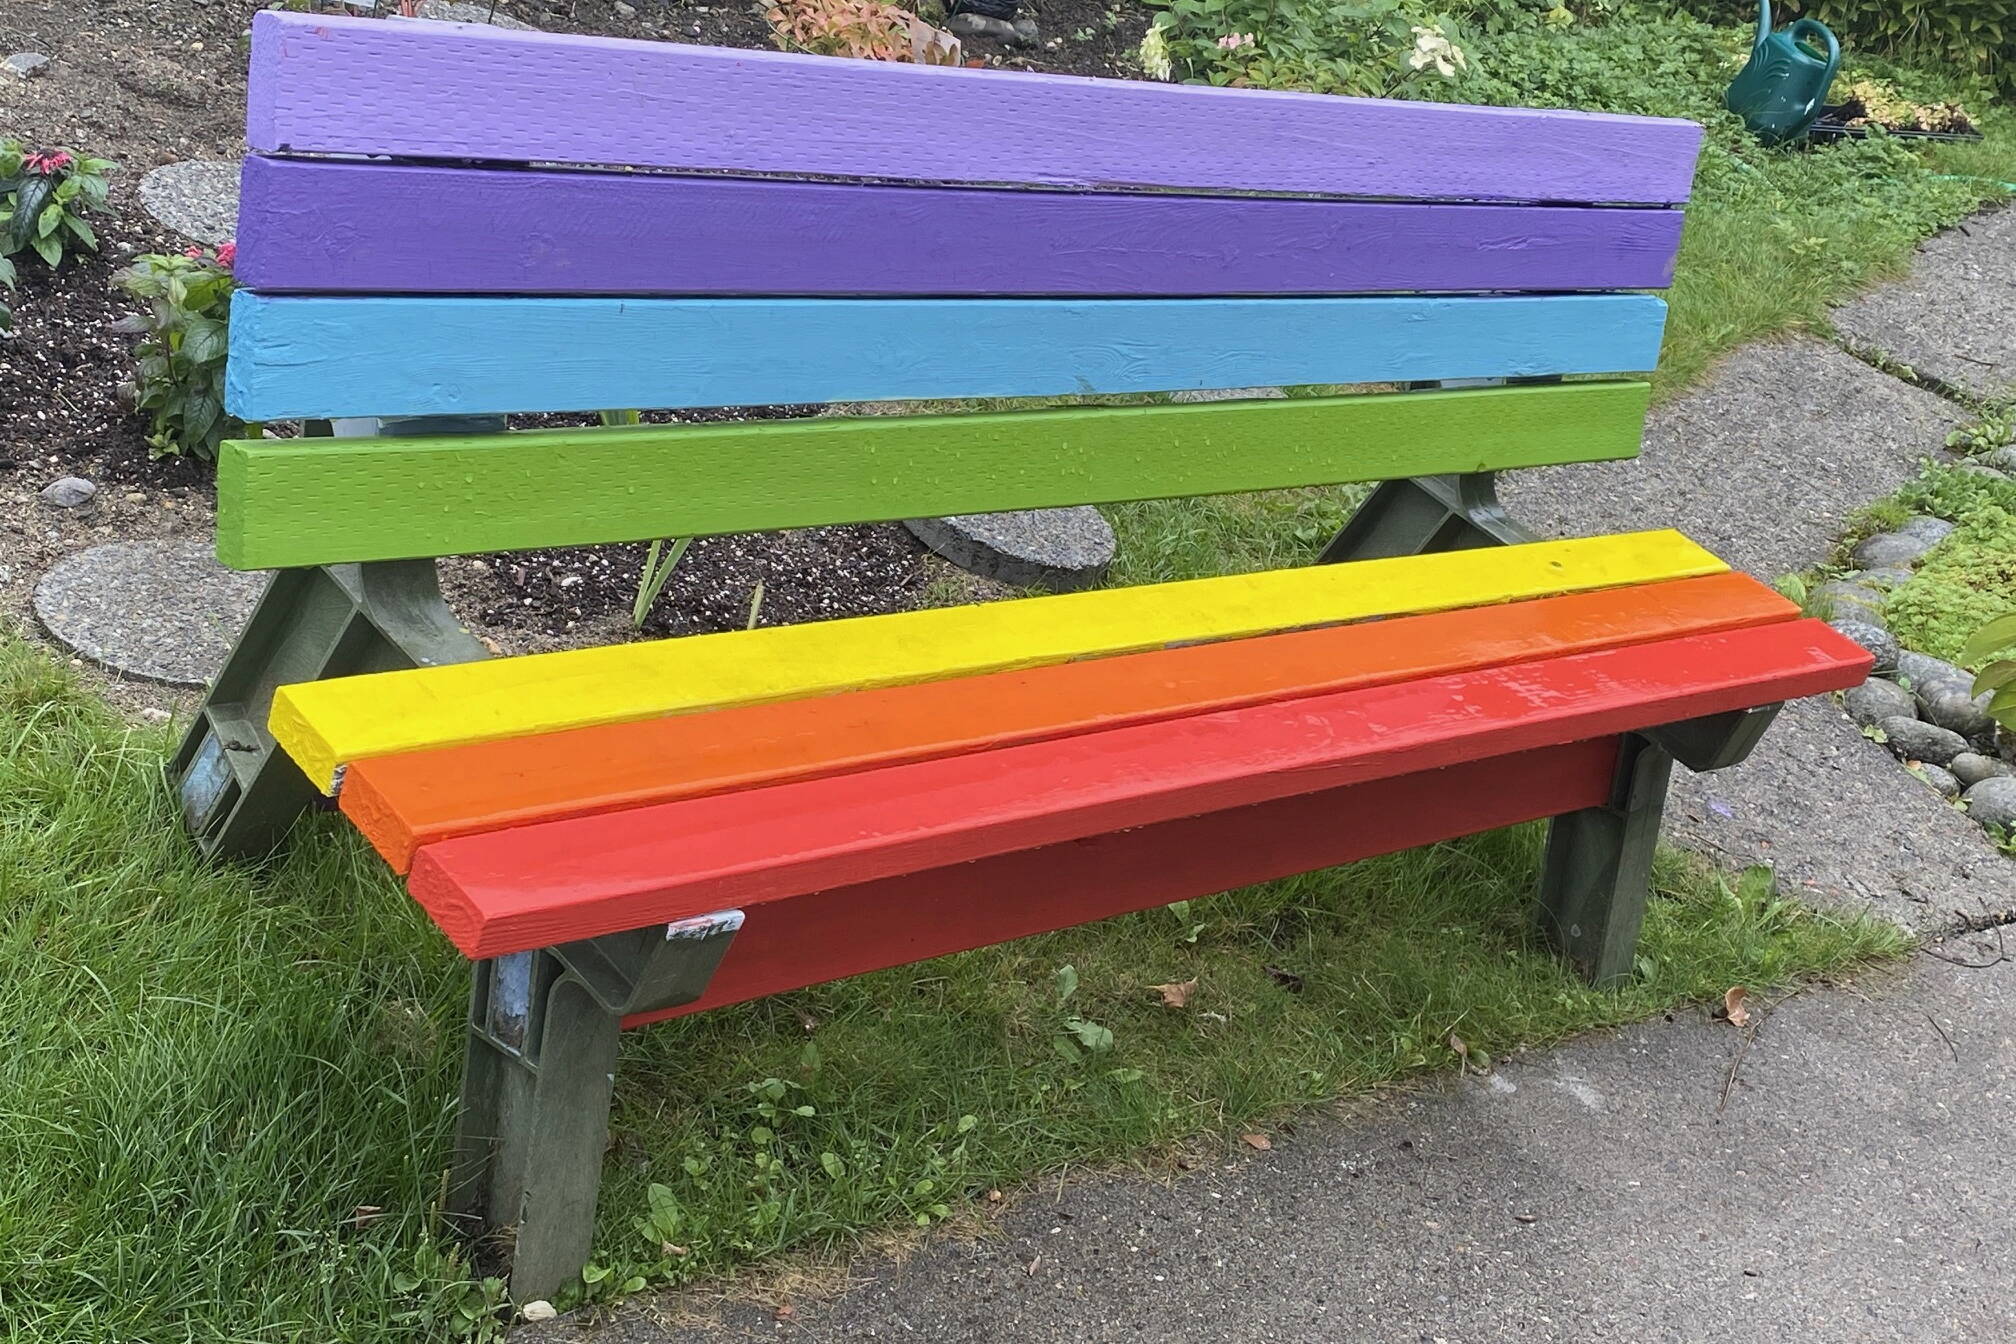 A rainbow bench downtown on Sept. 8. (Photo by Denise Carroll)